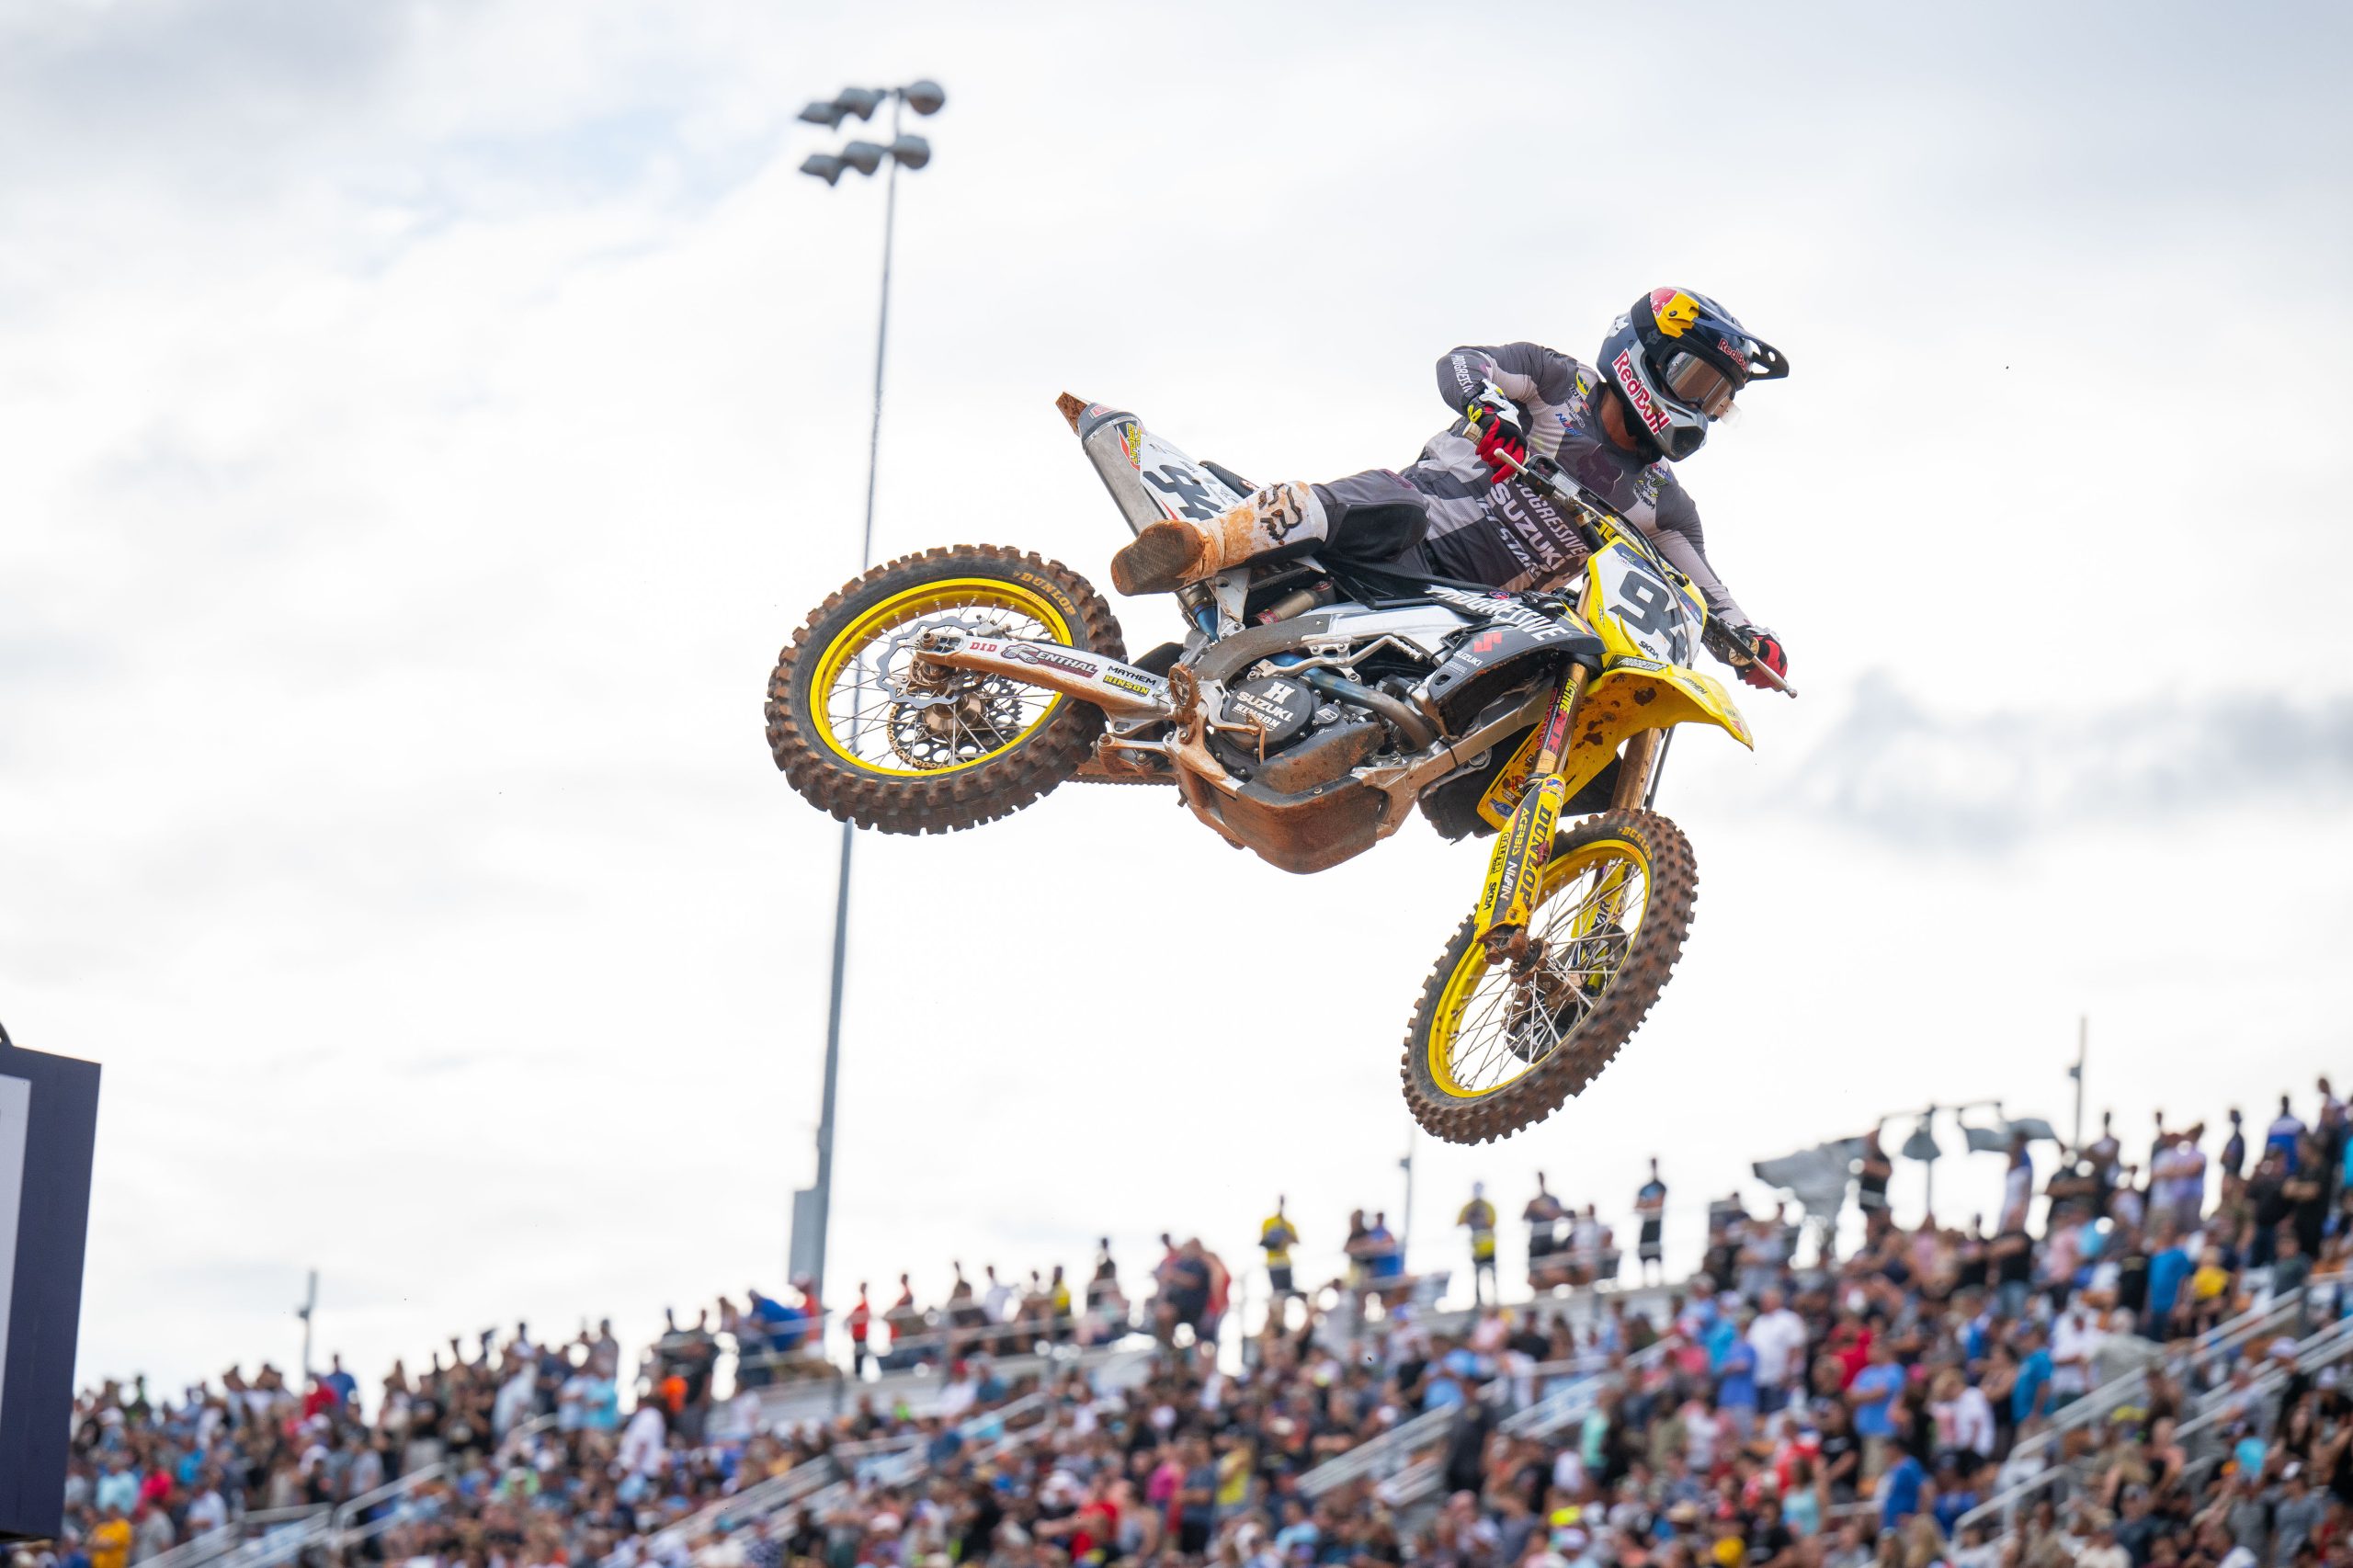 Ken Roczen led the early laps of the second moto in the 450 Class. Photo Credit: Feld Motor Sports, Inc.